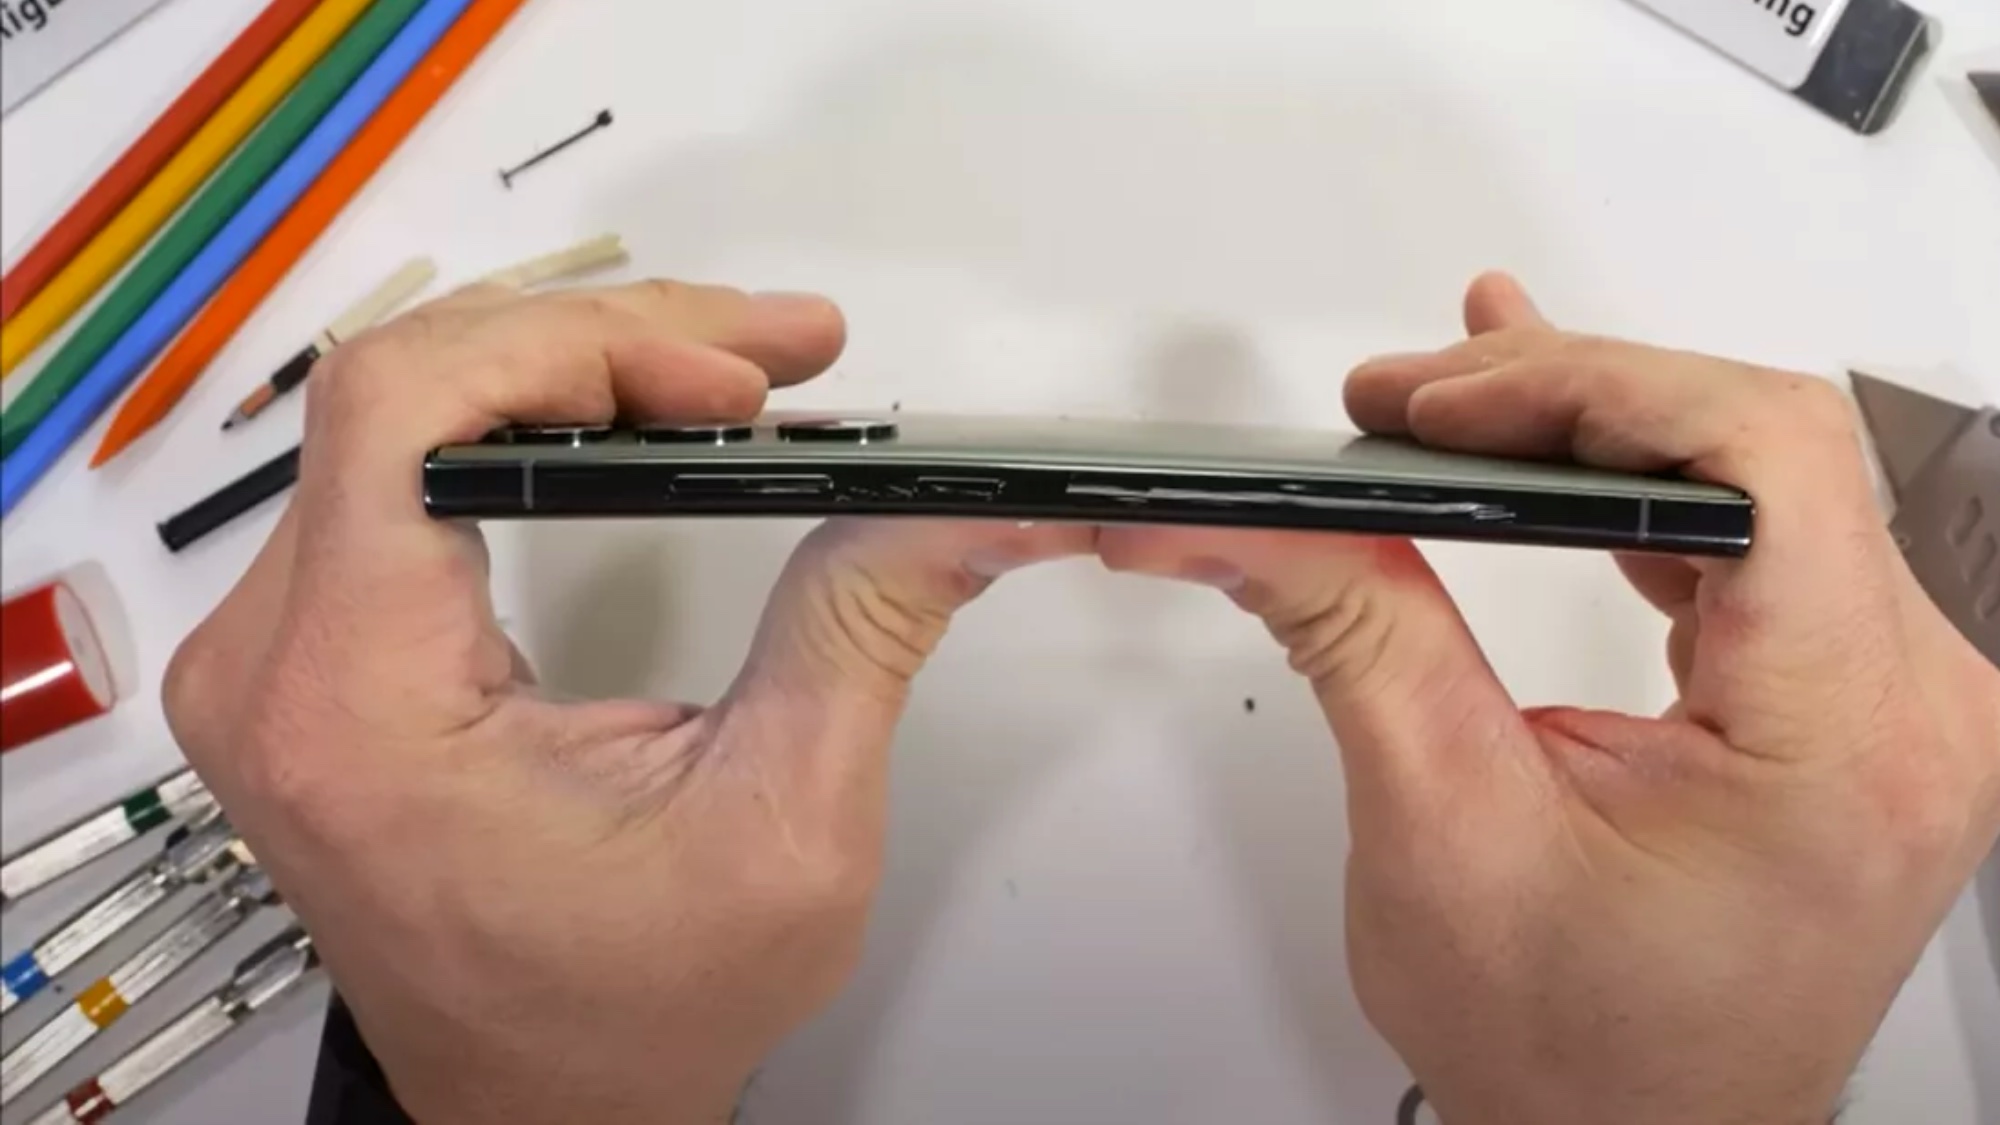 Samsung Galaxy S23 Ultra durability, repairability put to the test and  here's how it fared